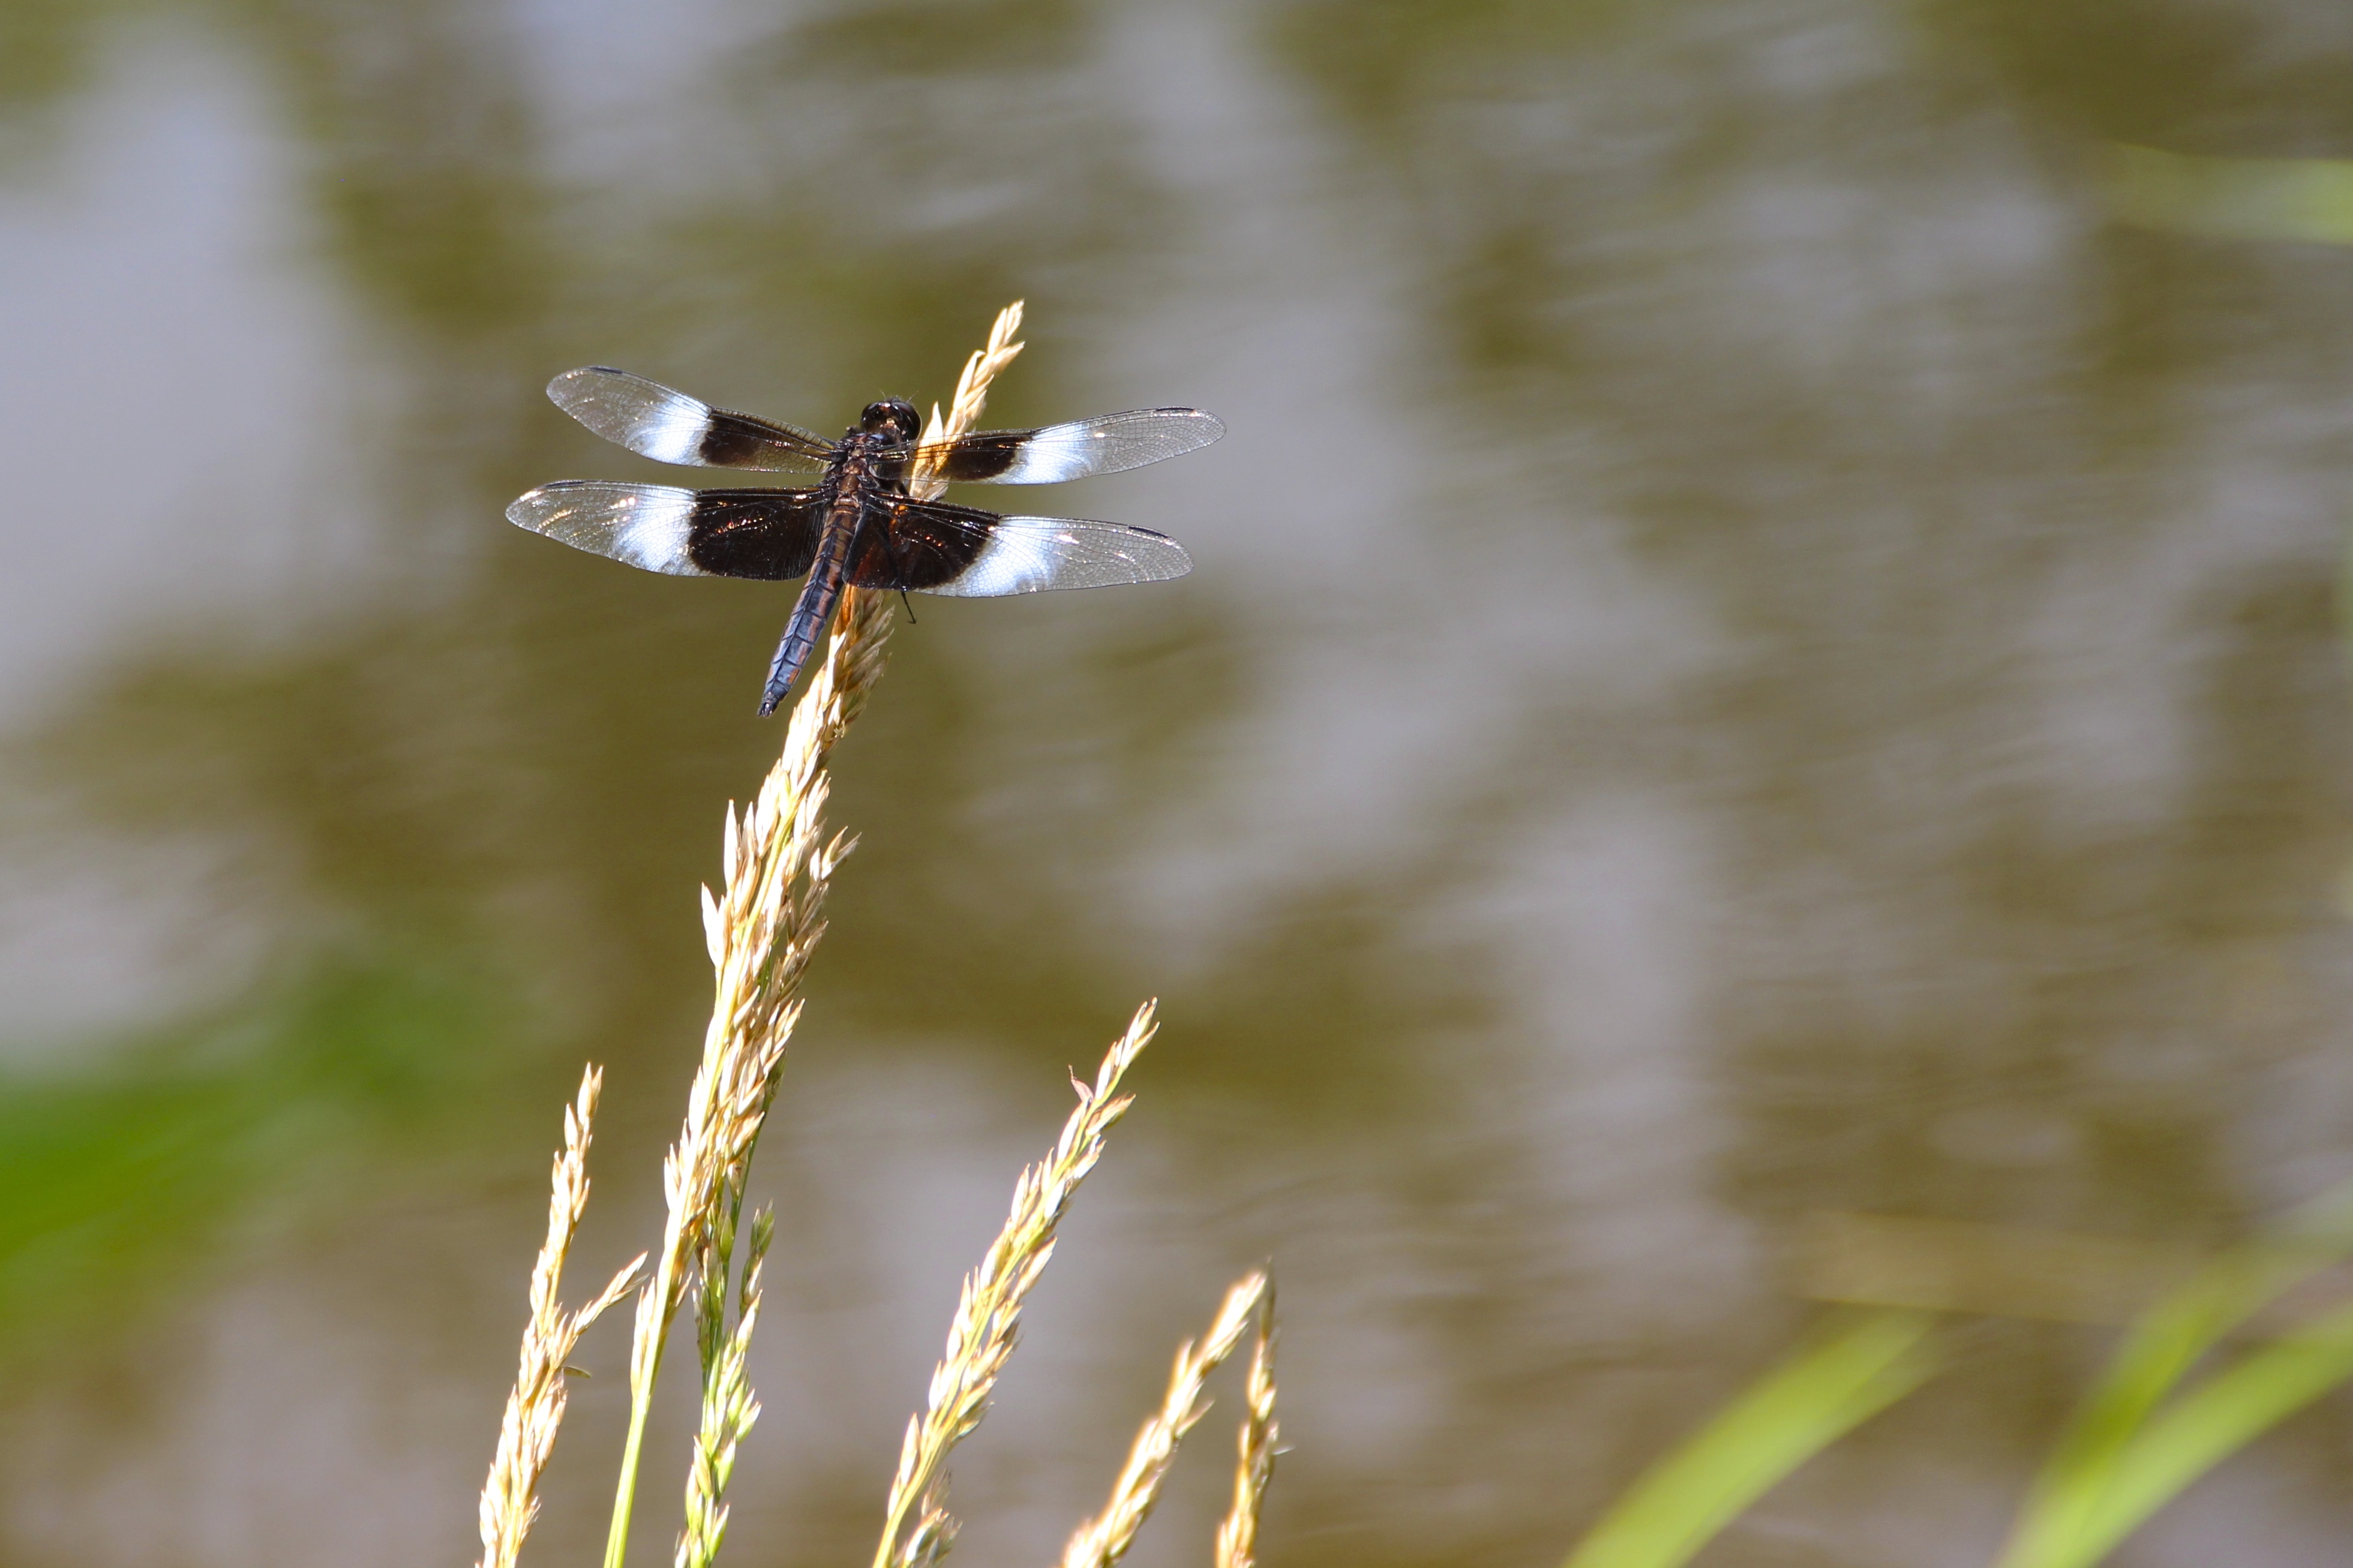 A dragonfly with white and black wings rests at the end of a stalk of tall grass.